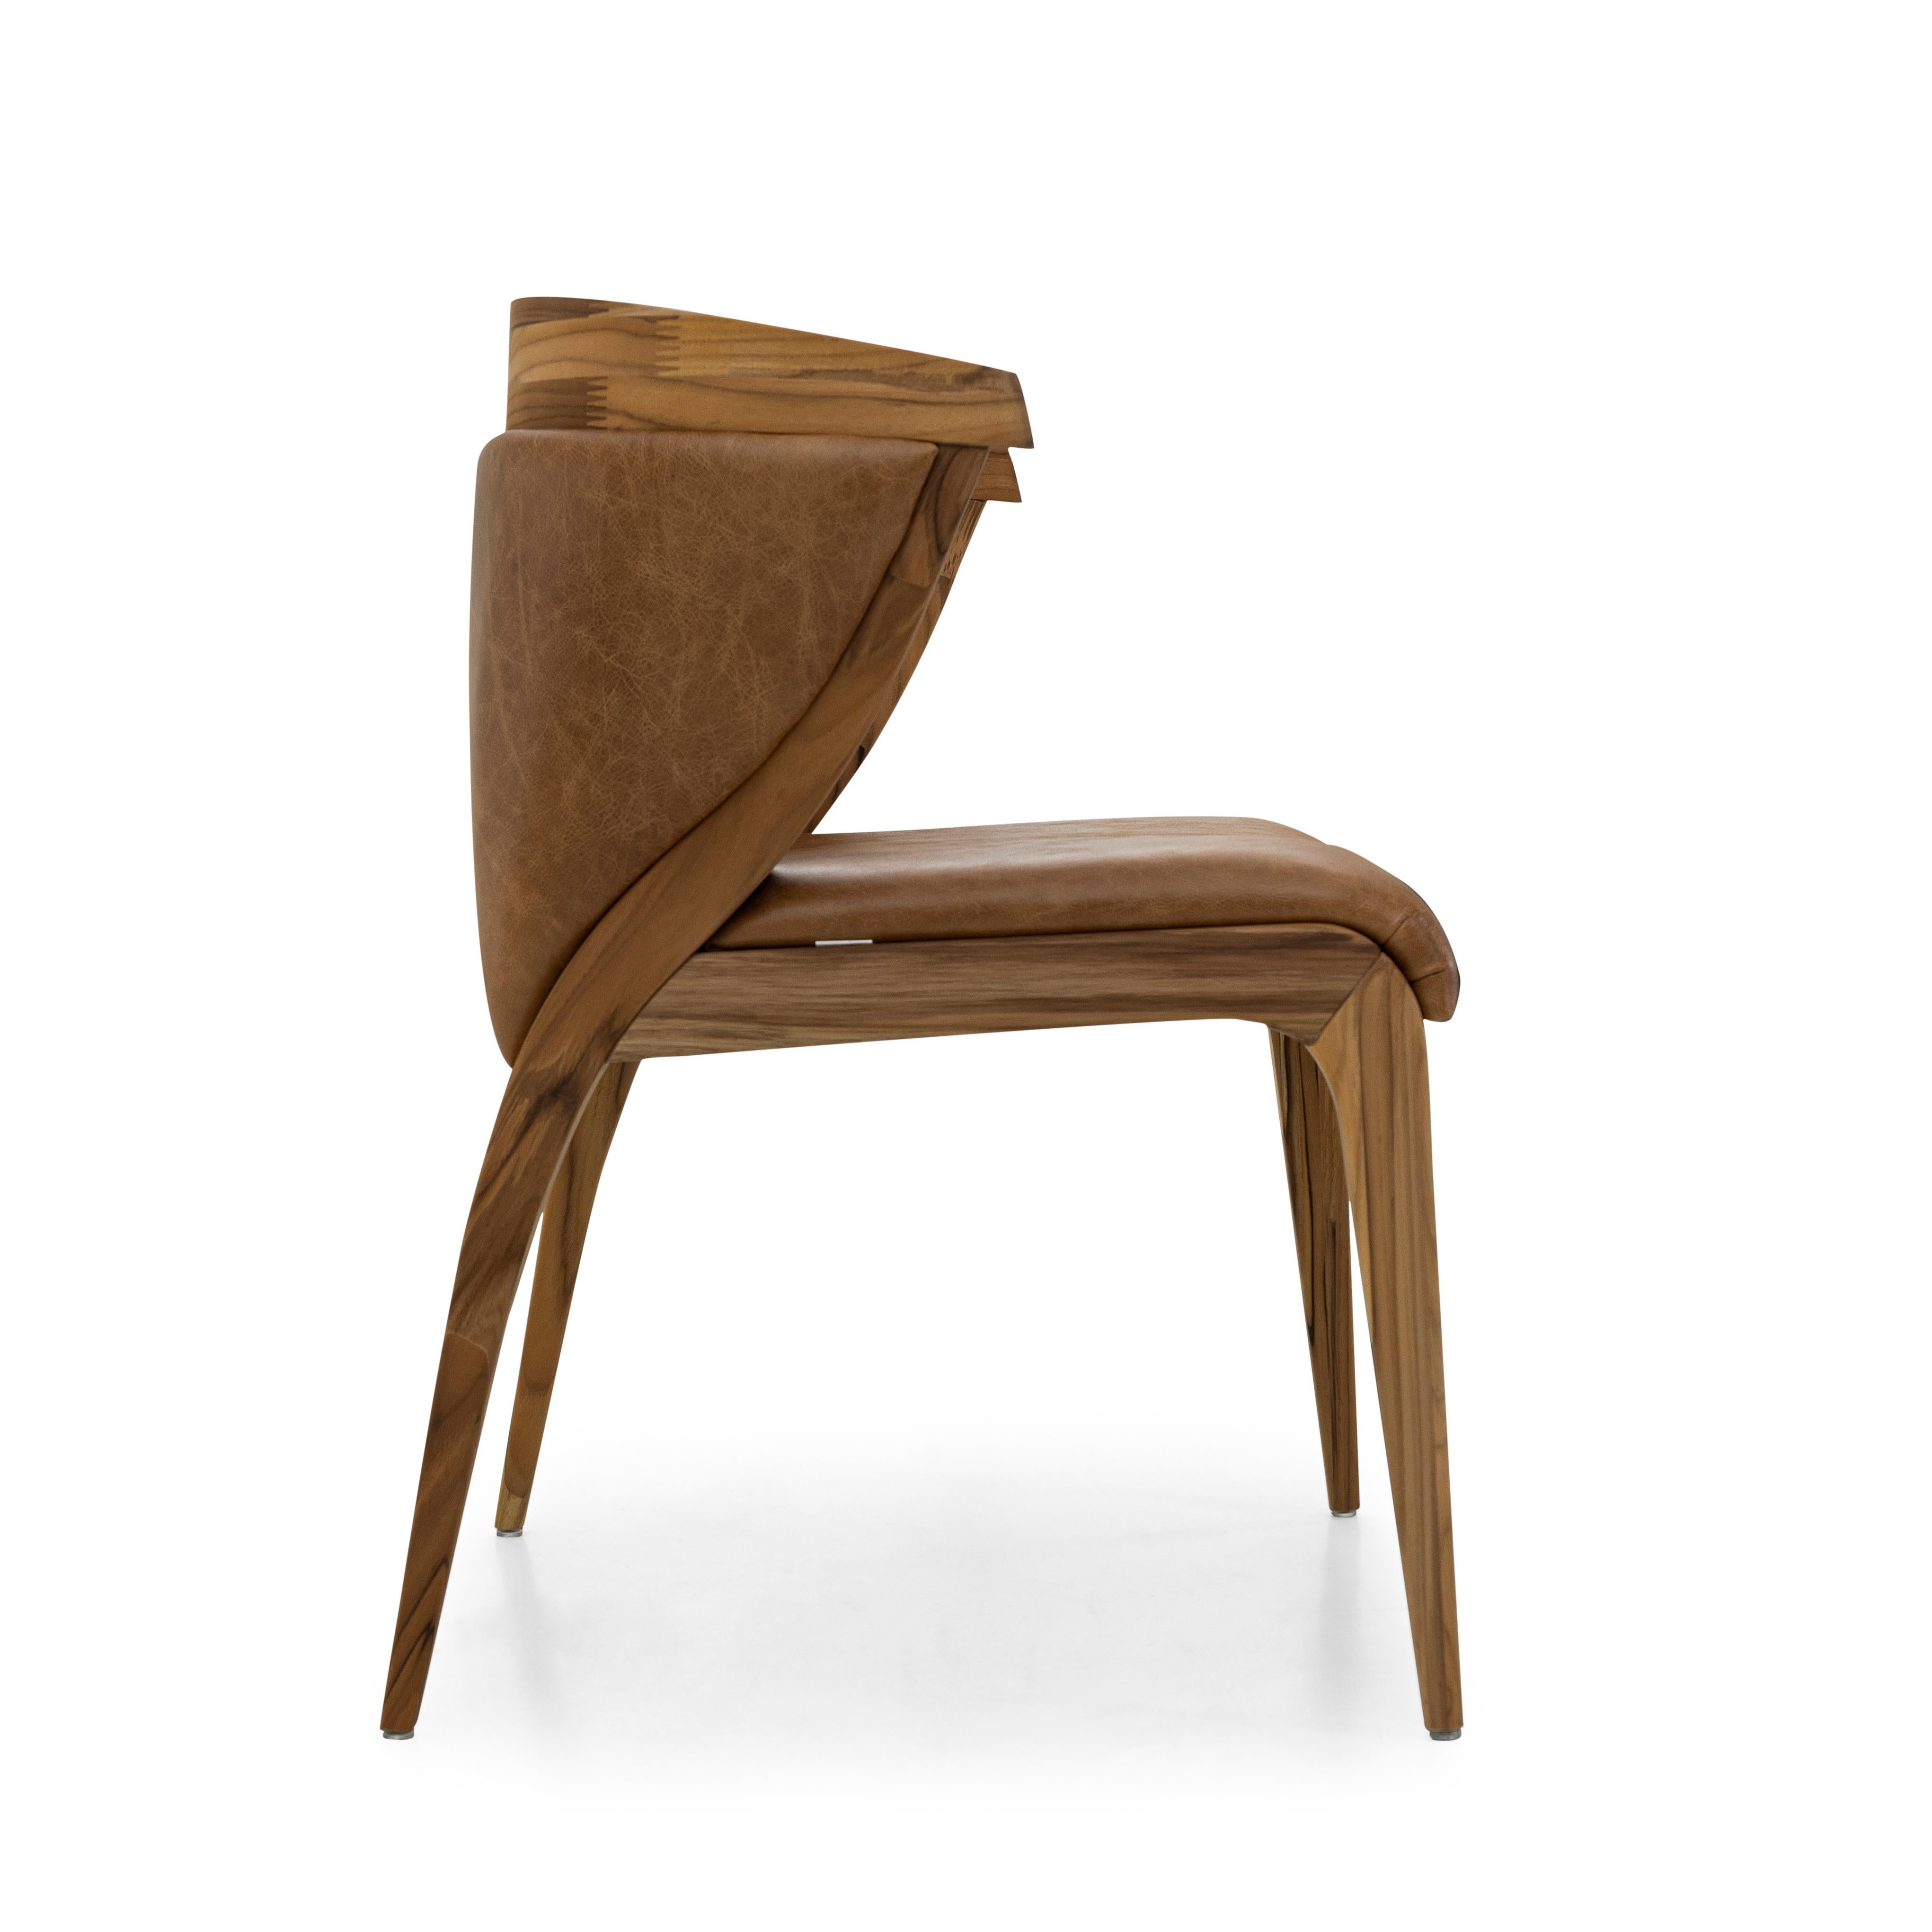 Contemporary Mat Dining Chair in Teak Wood Finish, Upholstered Back and Brown Leather Seat For Sale